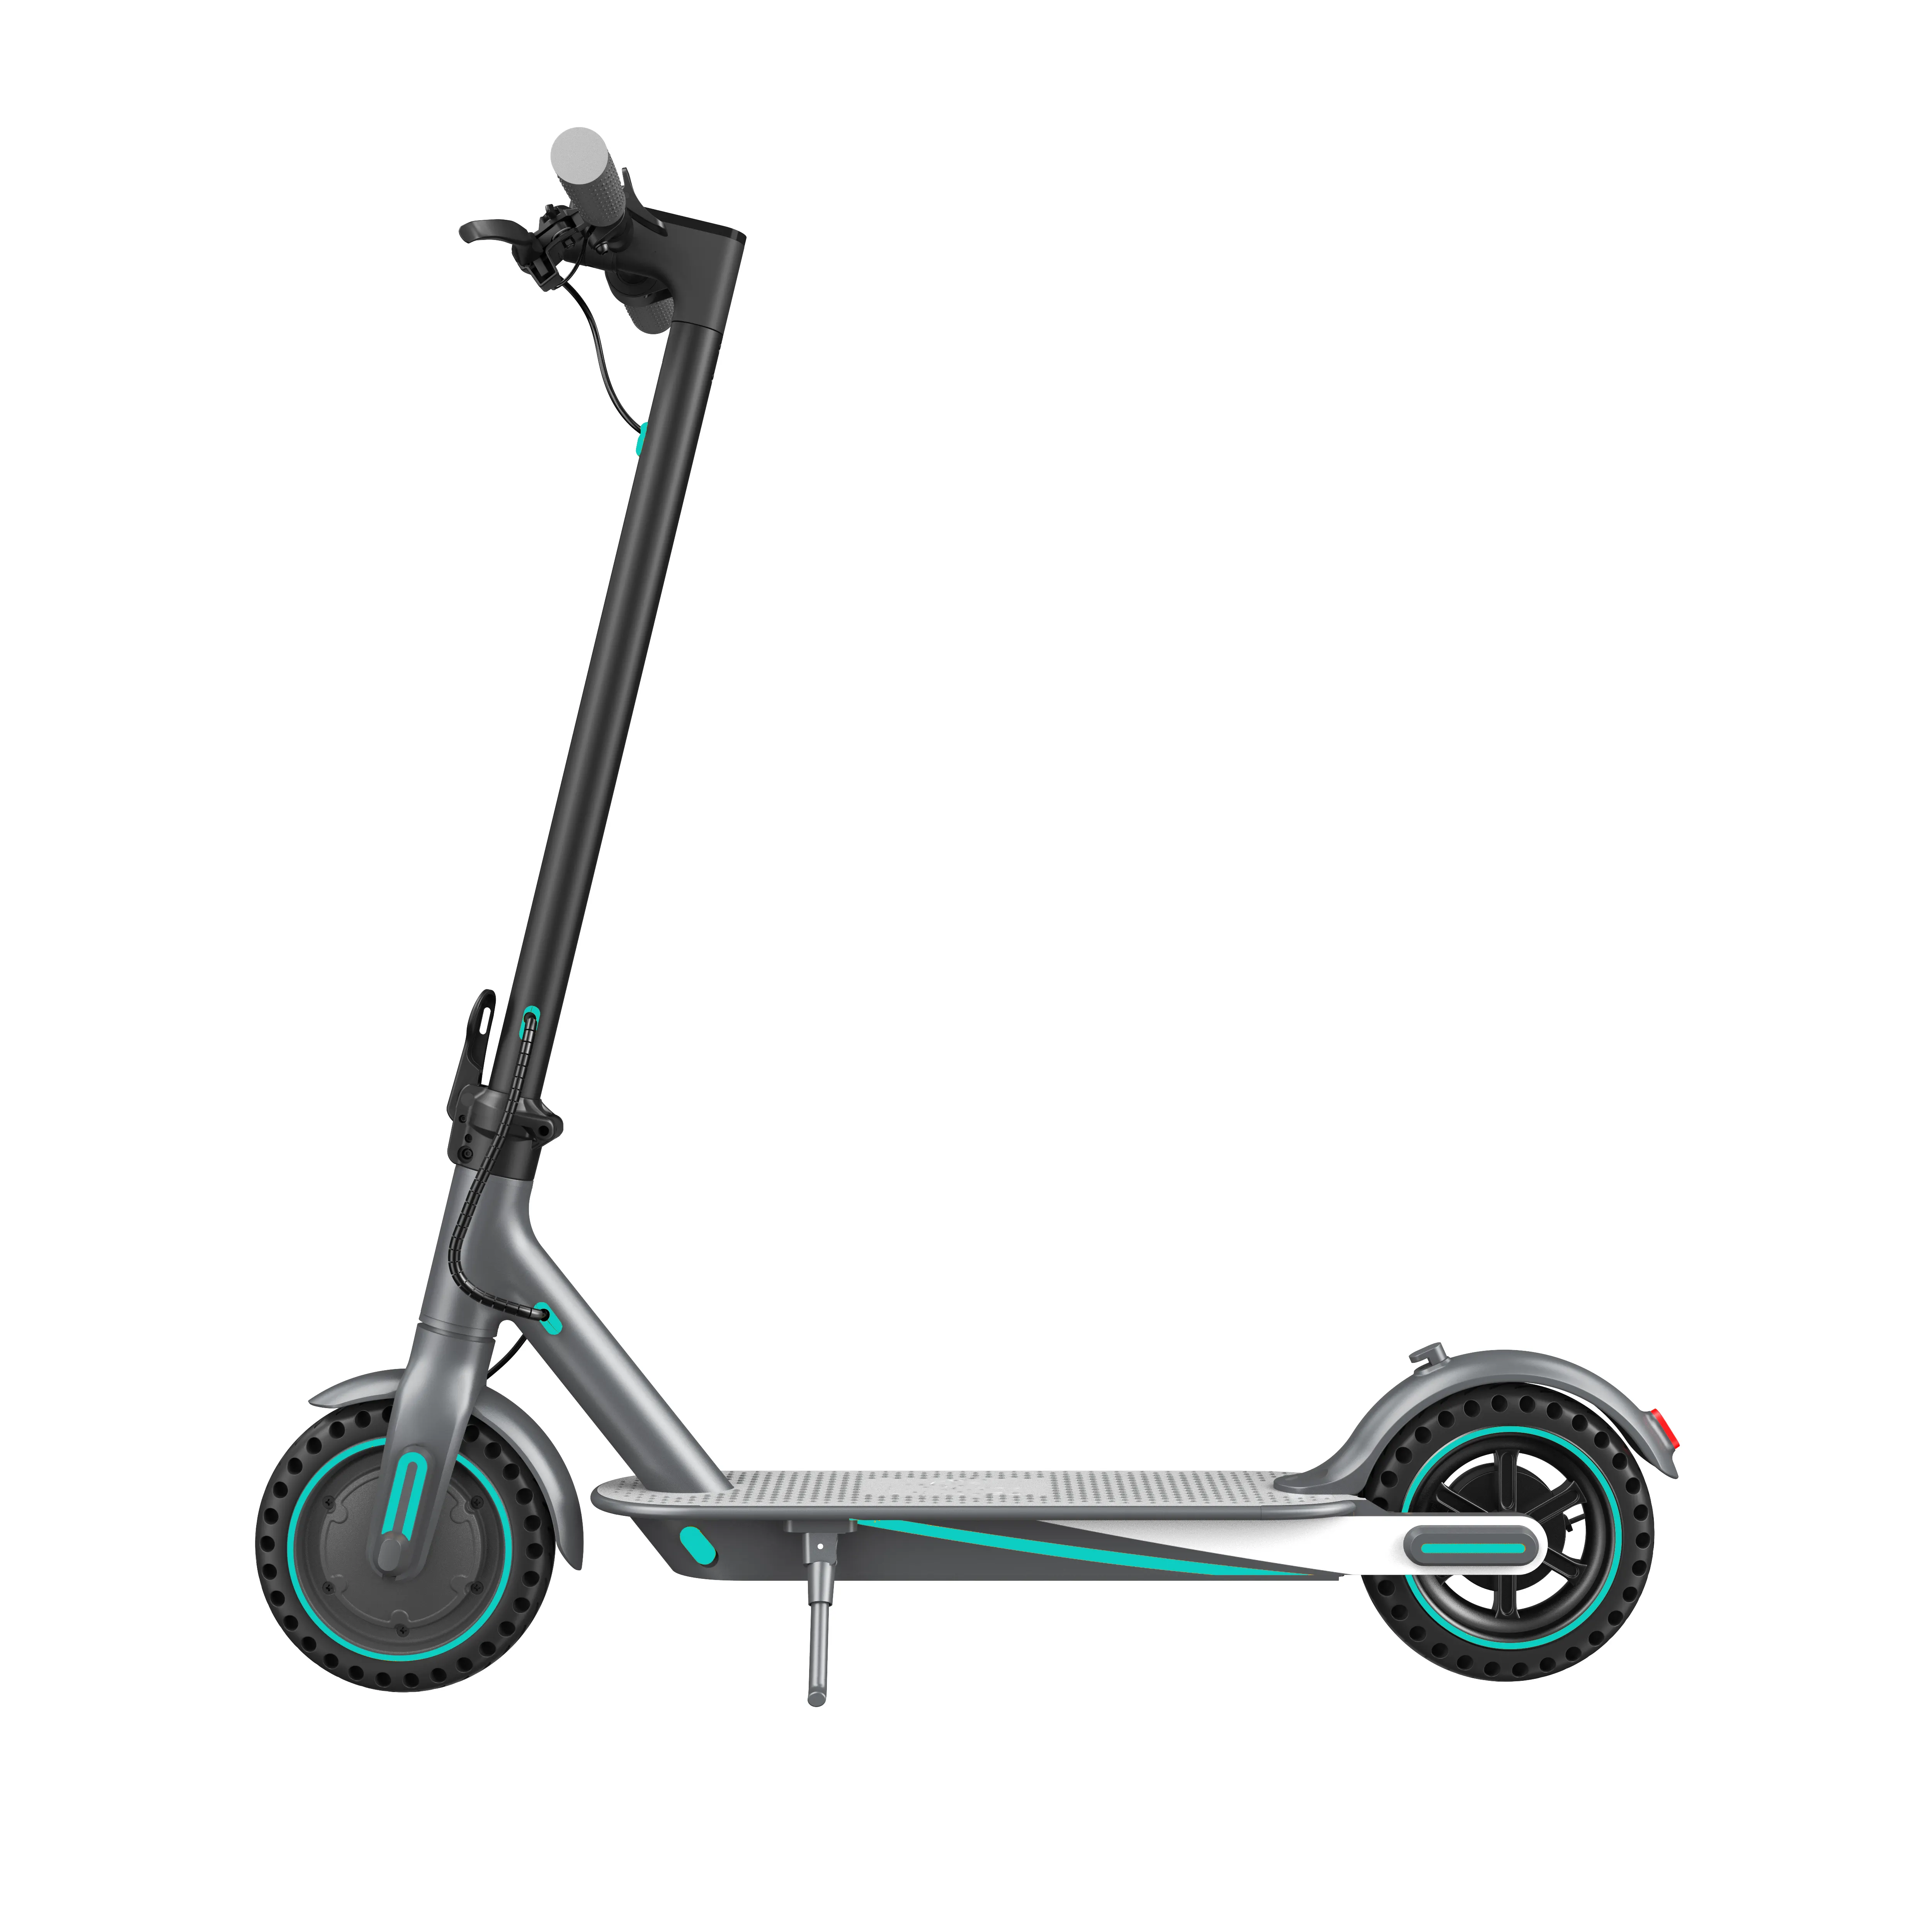 Top Sales Bluetooth E Scooter Adult V8 Blue Electric Scooter Made In China with EU USA Warehouse